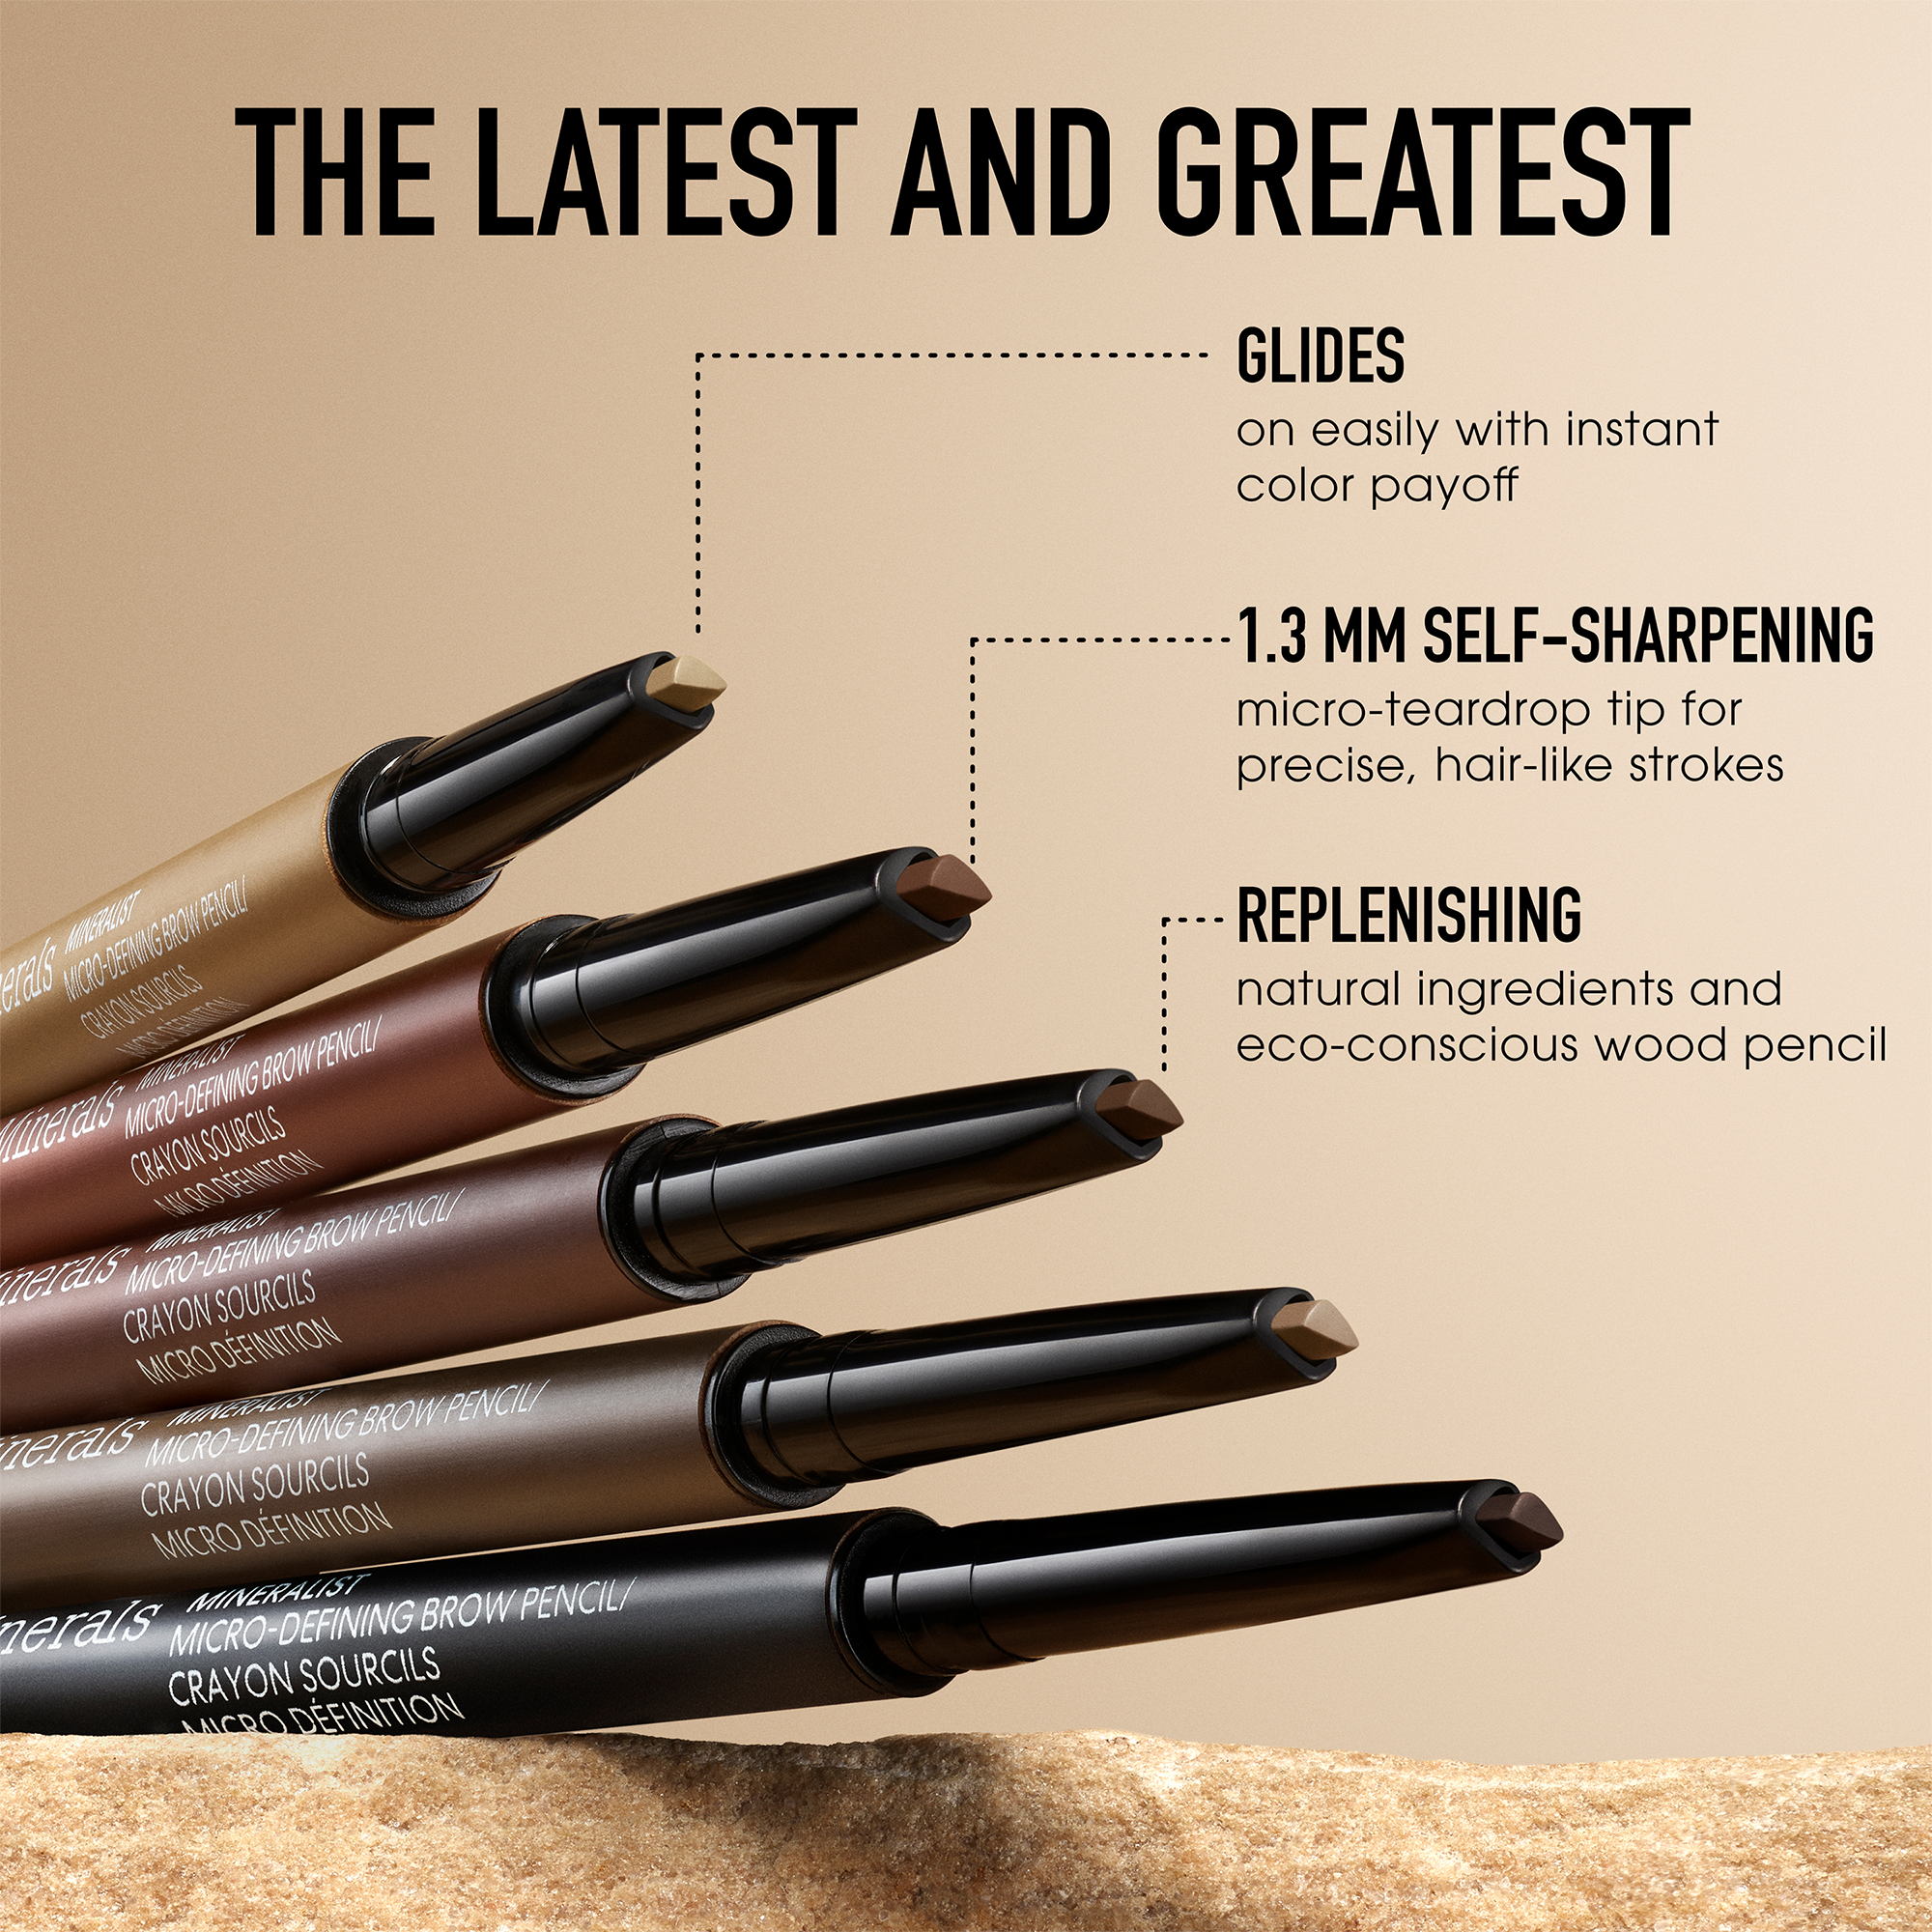 bareMinerals Mineralist Micro-Defining Eyebrow Pencil / TAUPE